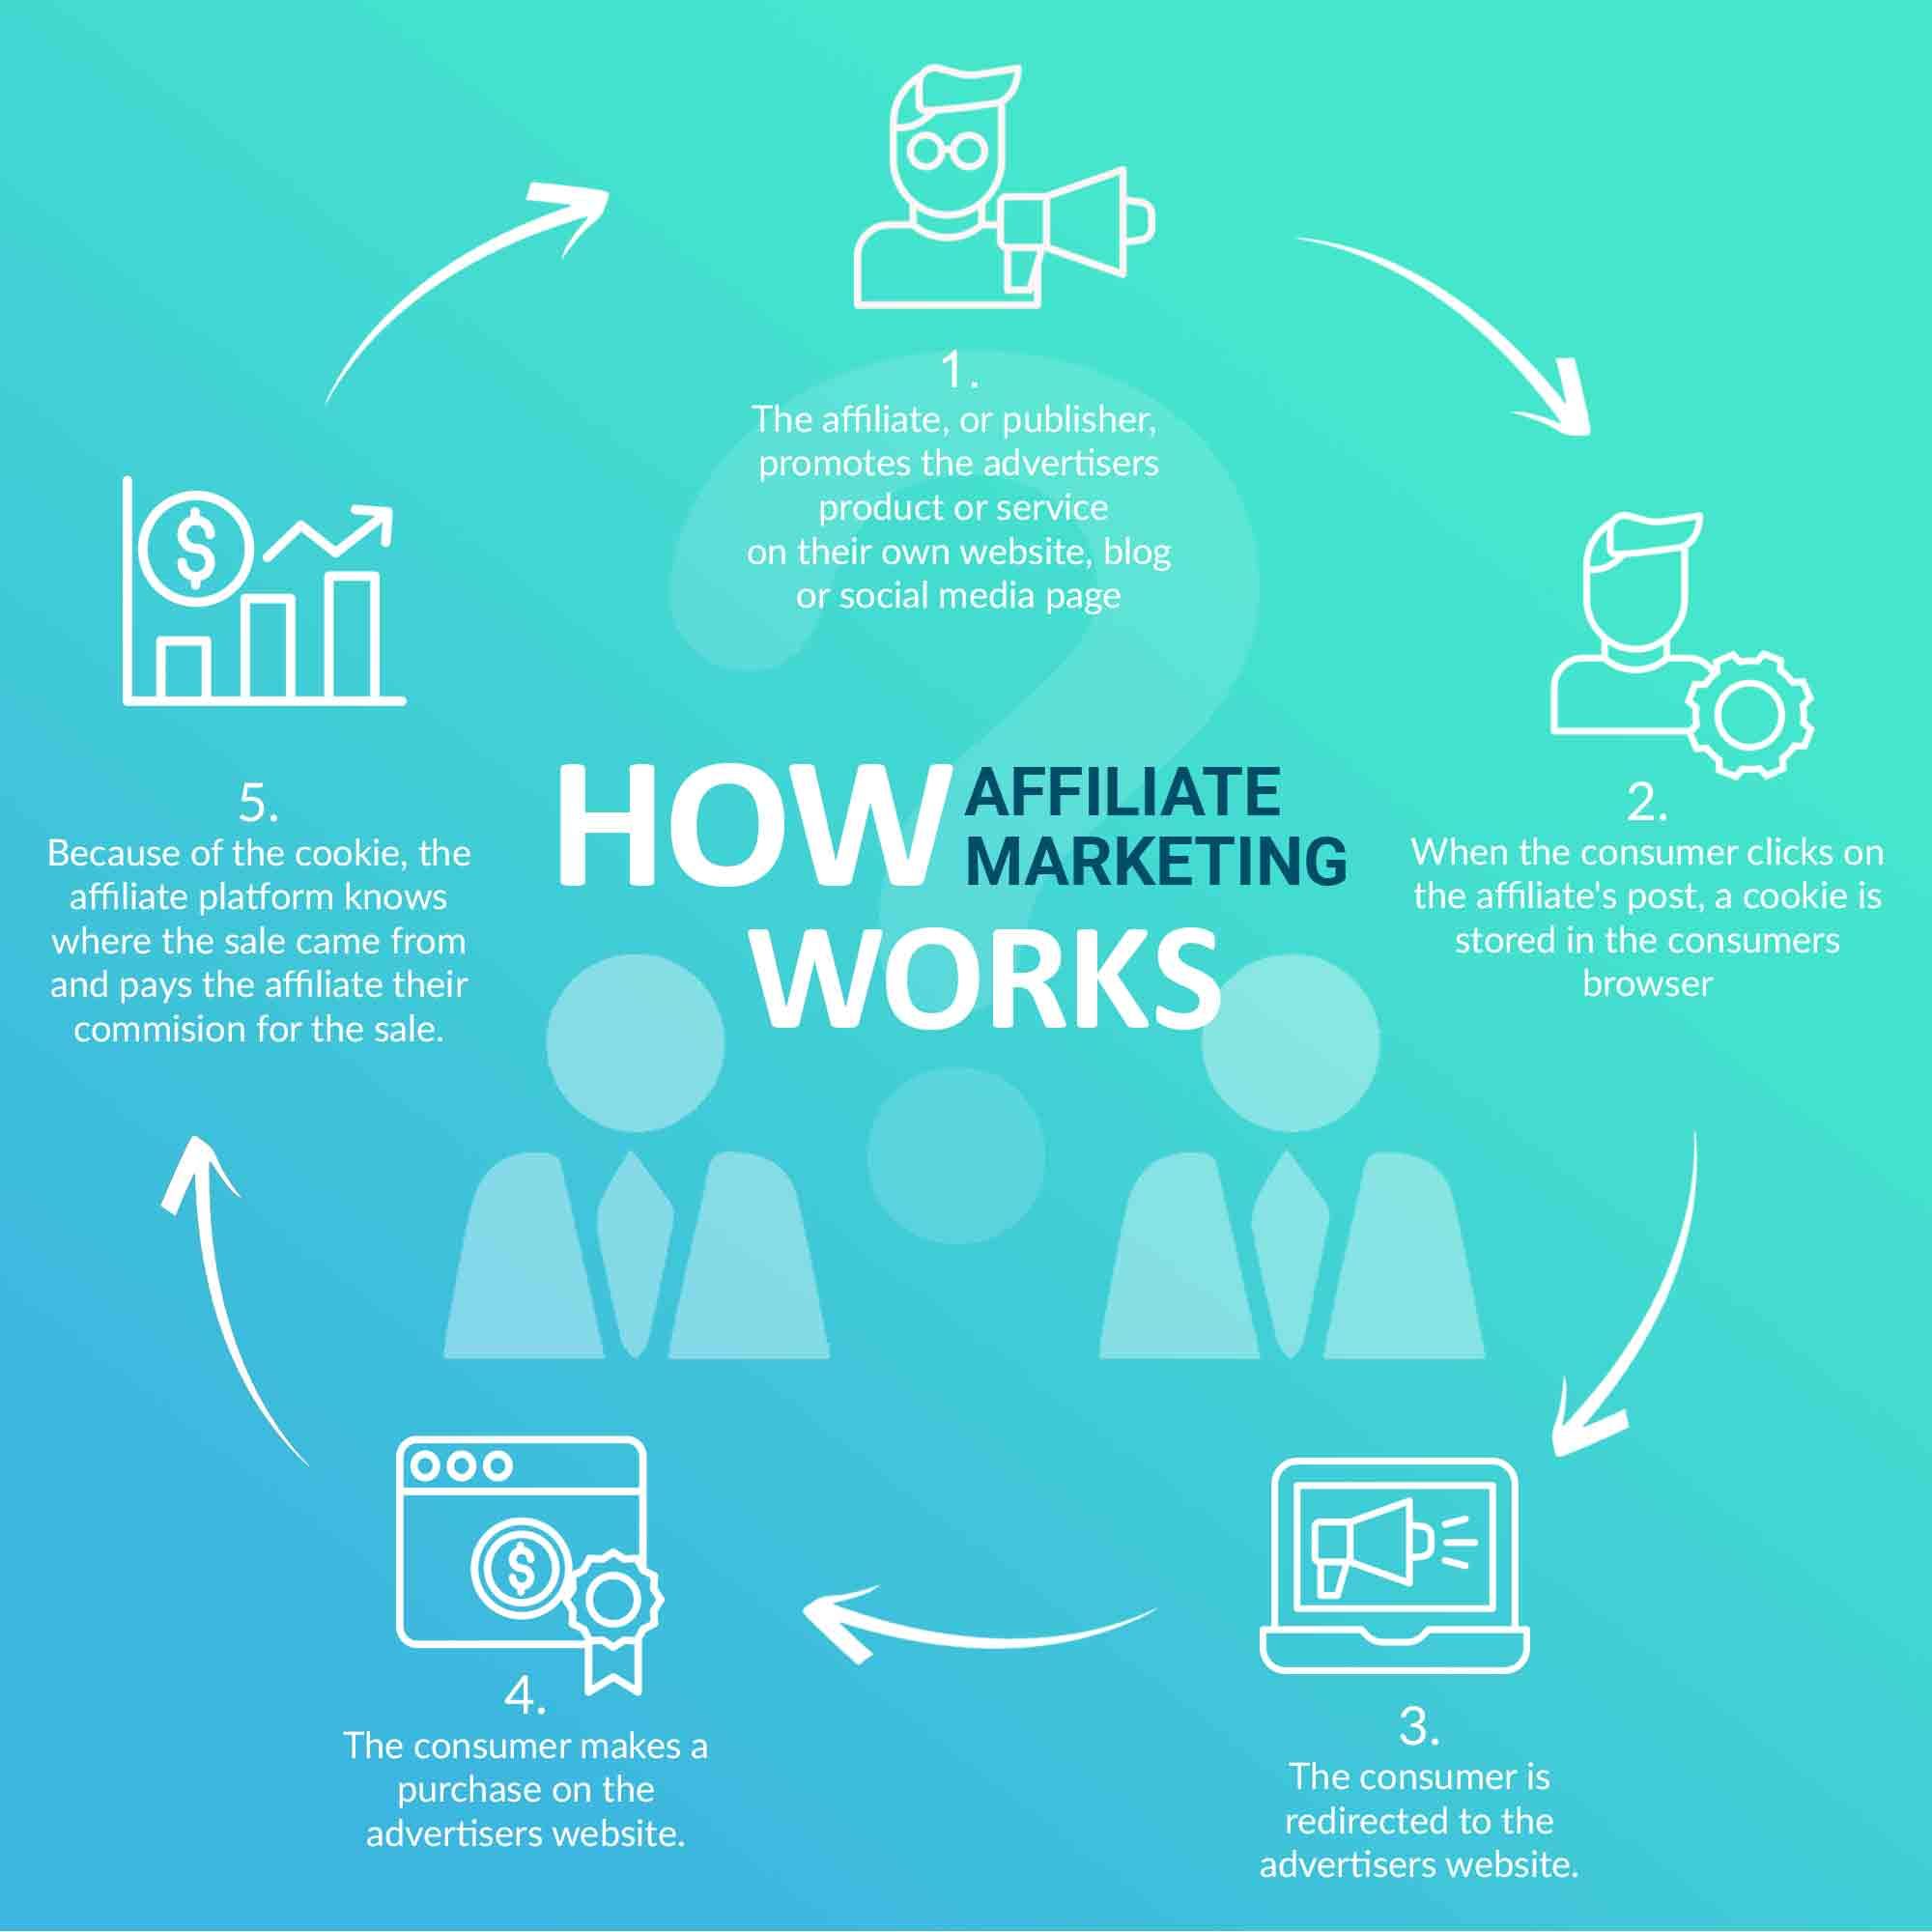 Guide to Affiliate Marketing